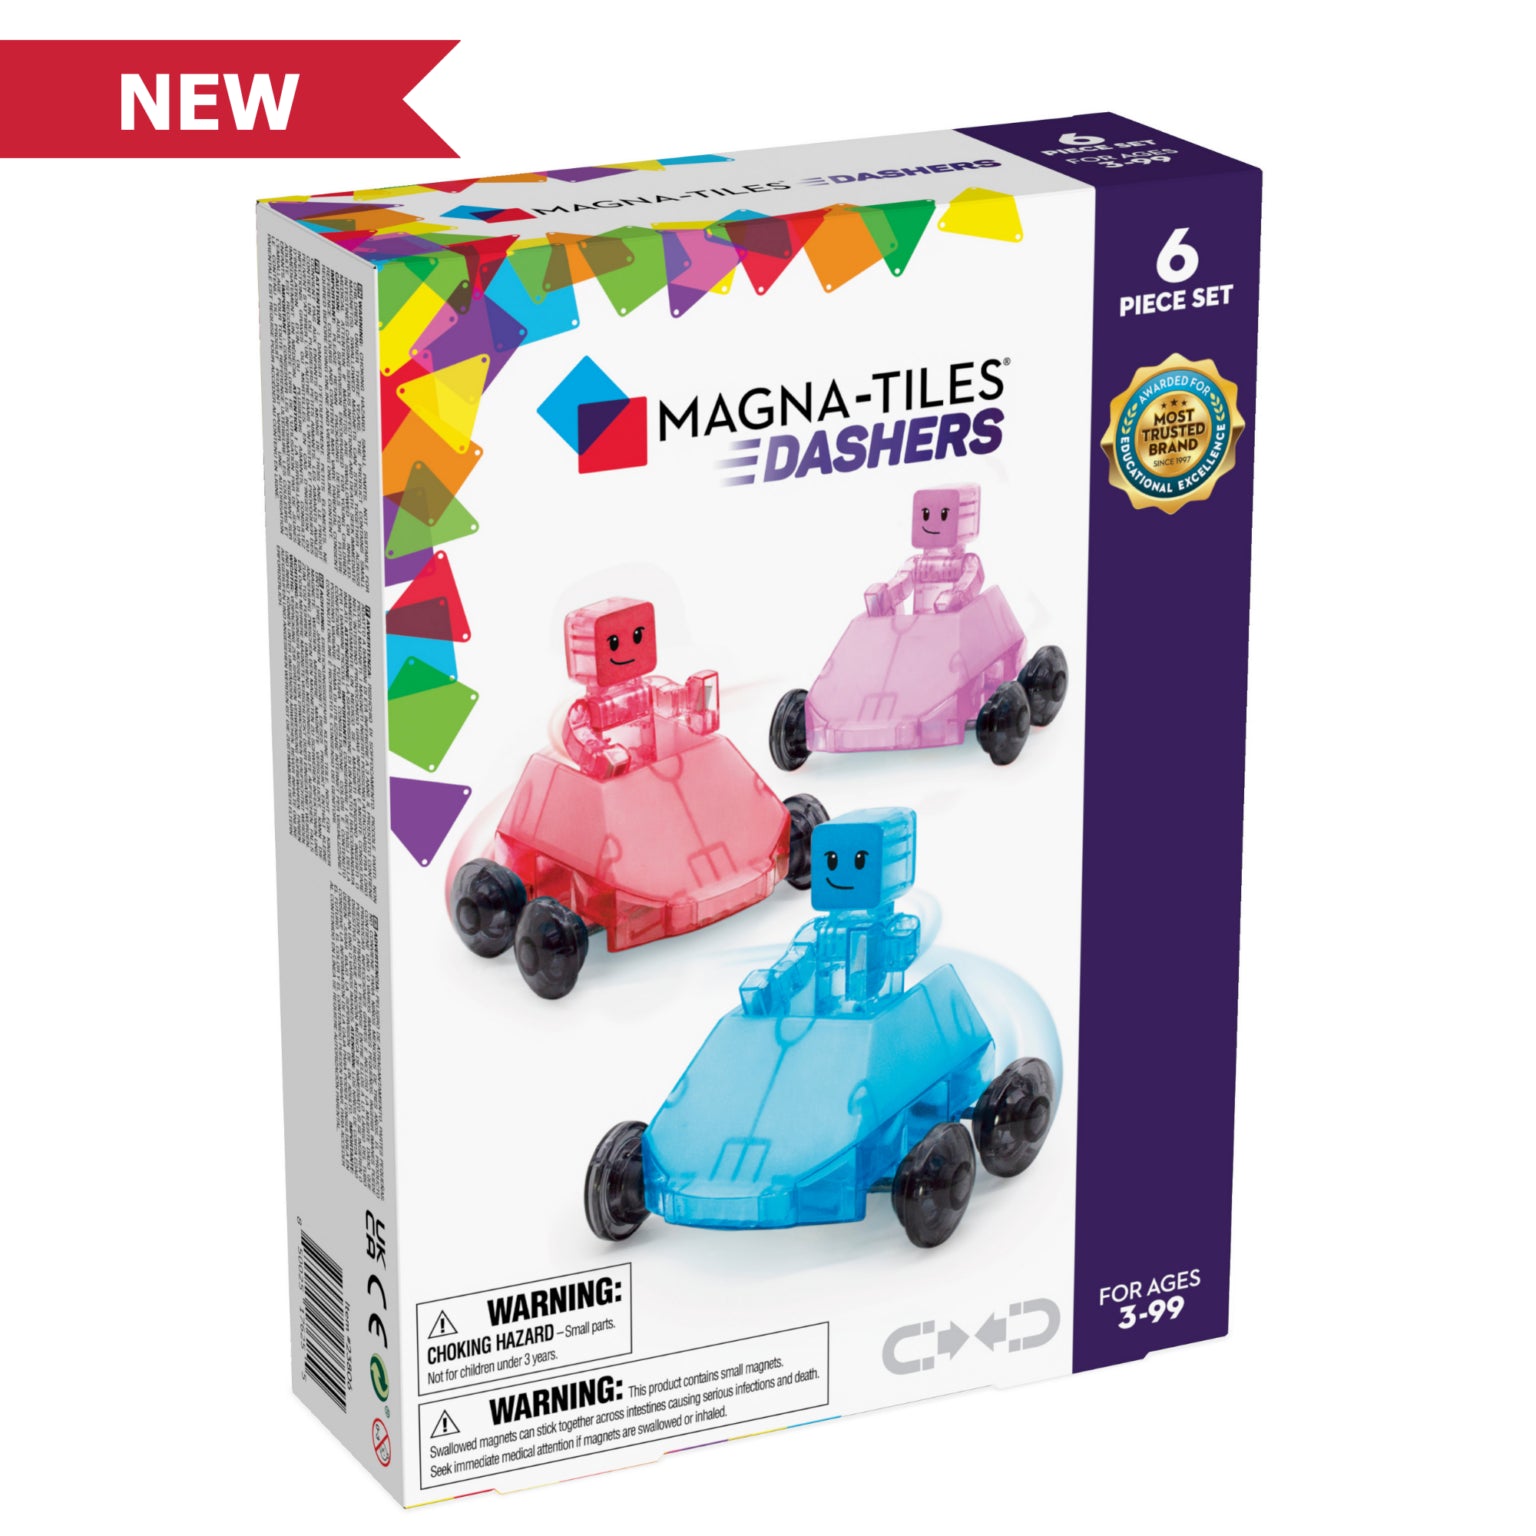 Dashers 6 Piece Set by Magna-Tiles # 23806